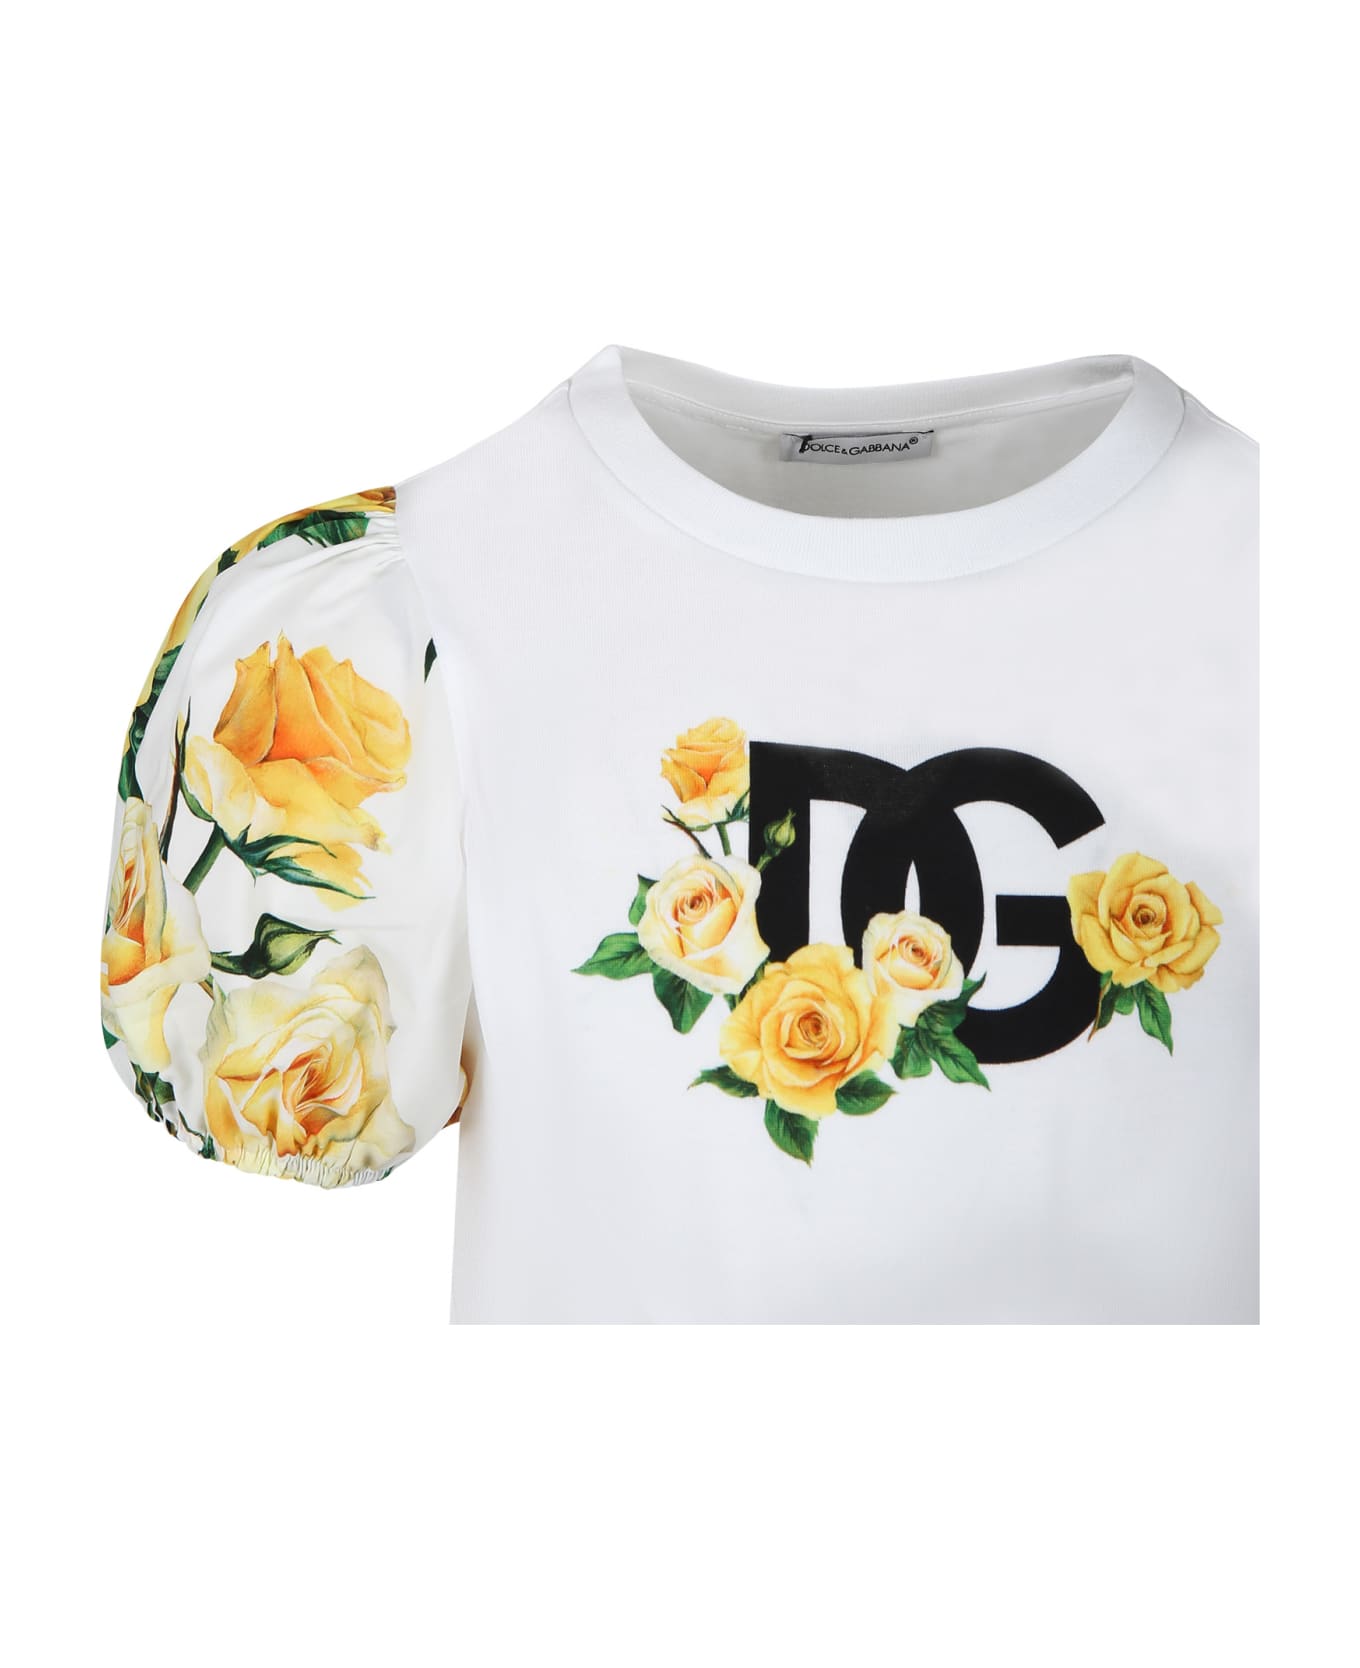 Dolce & Gabbana White T-shirt For Girl With Flowering Pattern - Giallo/bianco